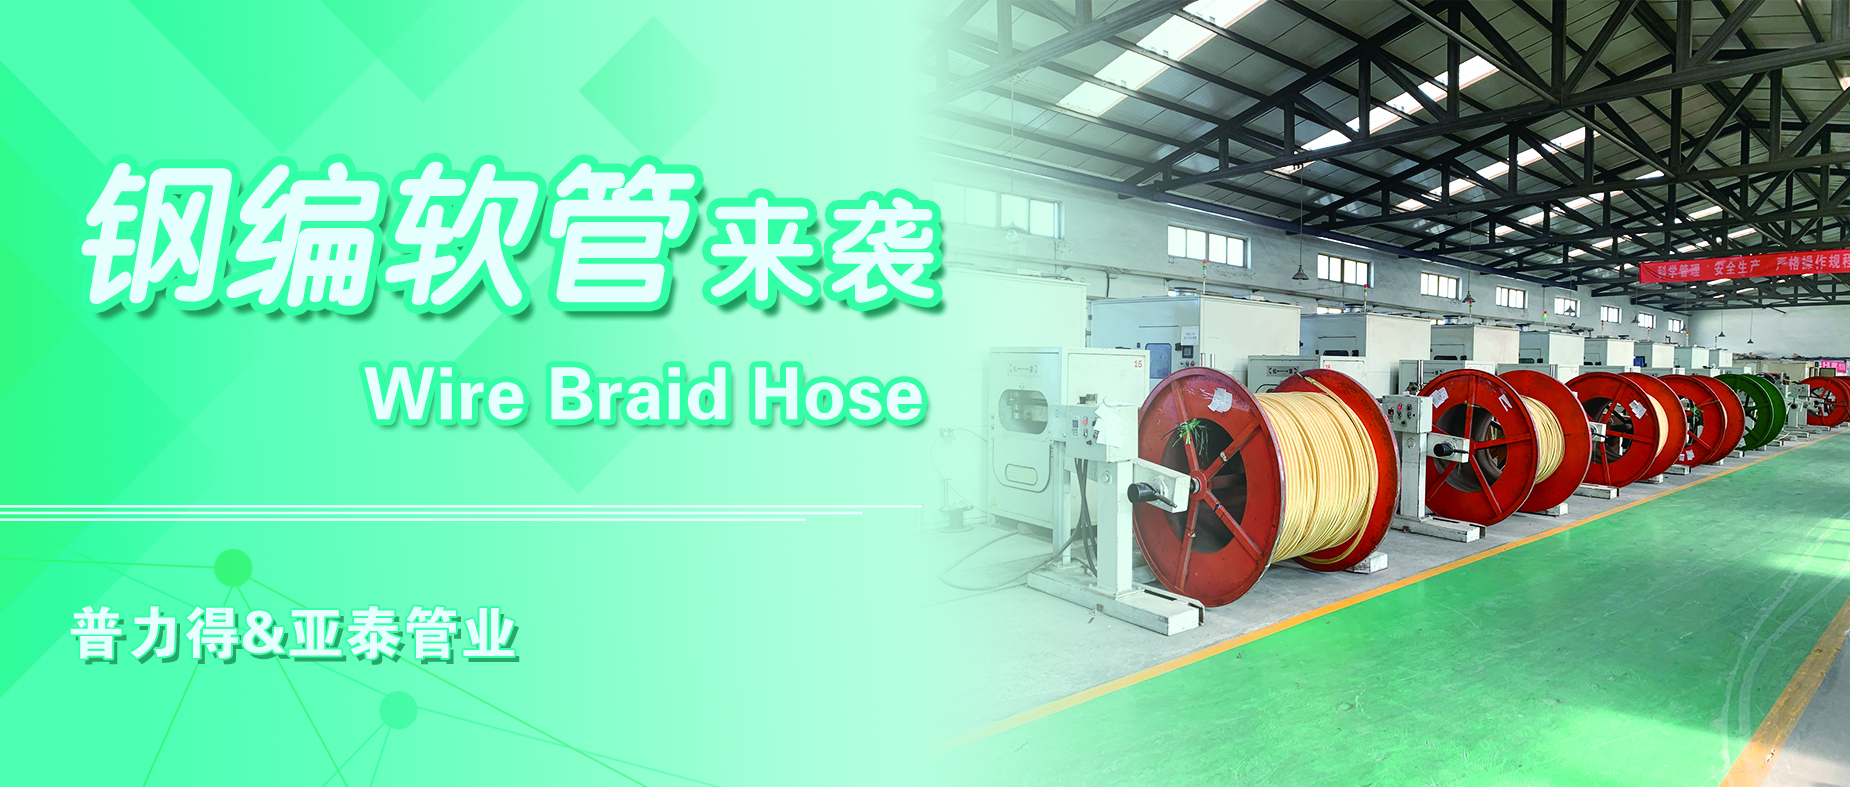 Everything you want in a regular wire braided hose can be found here!